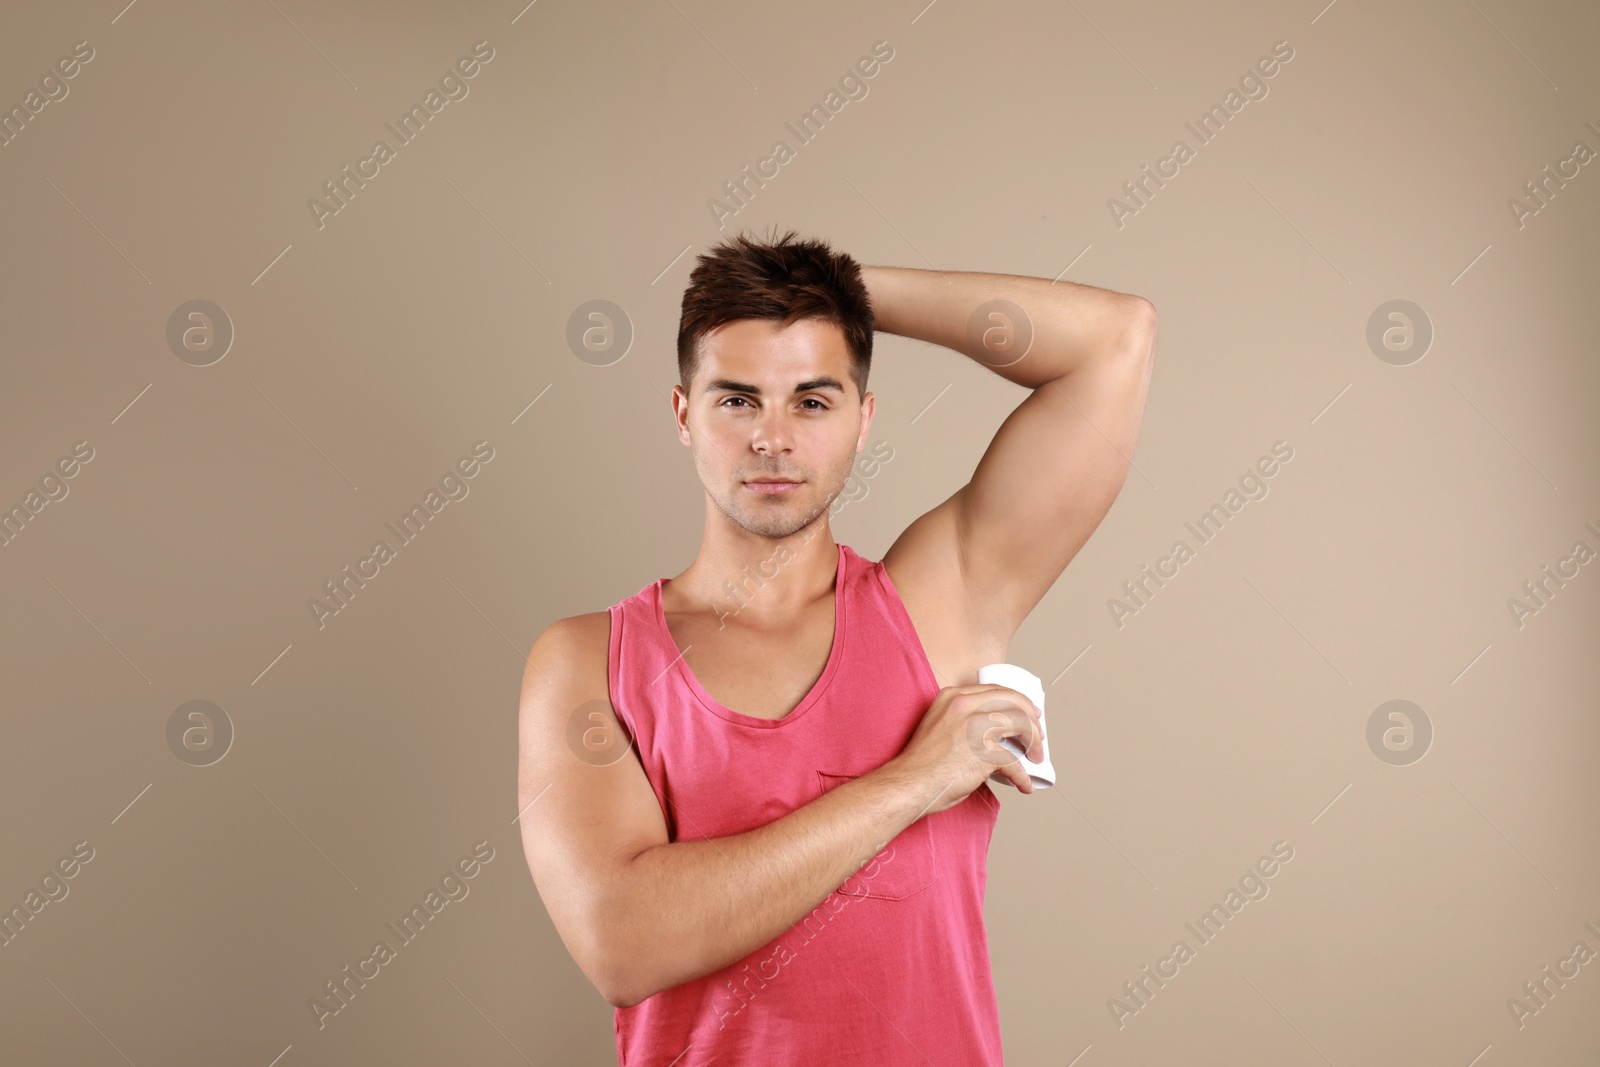 Photo of Young man applying deodorant to armpit on beige background